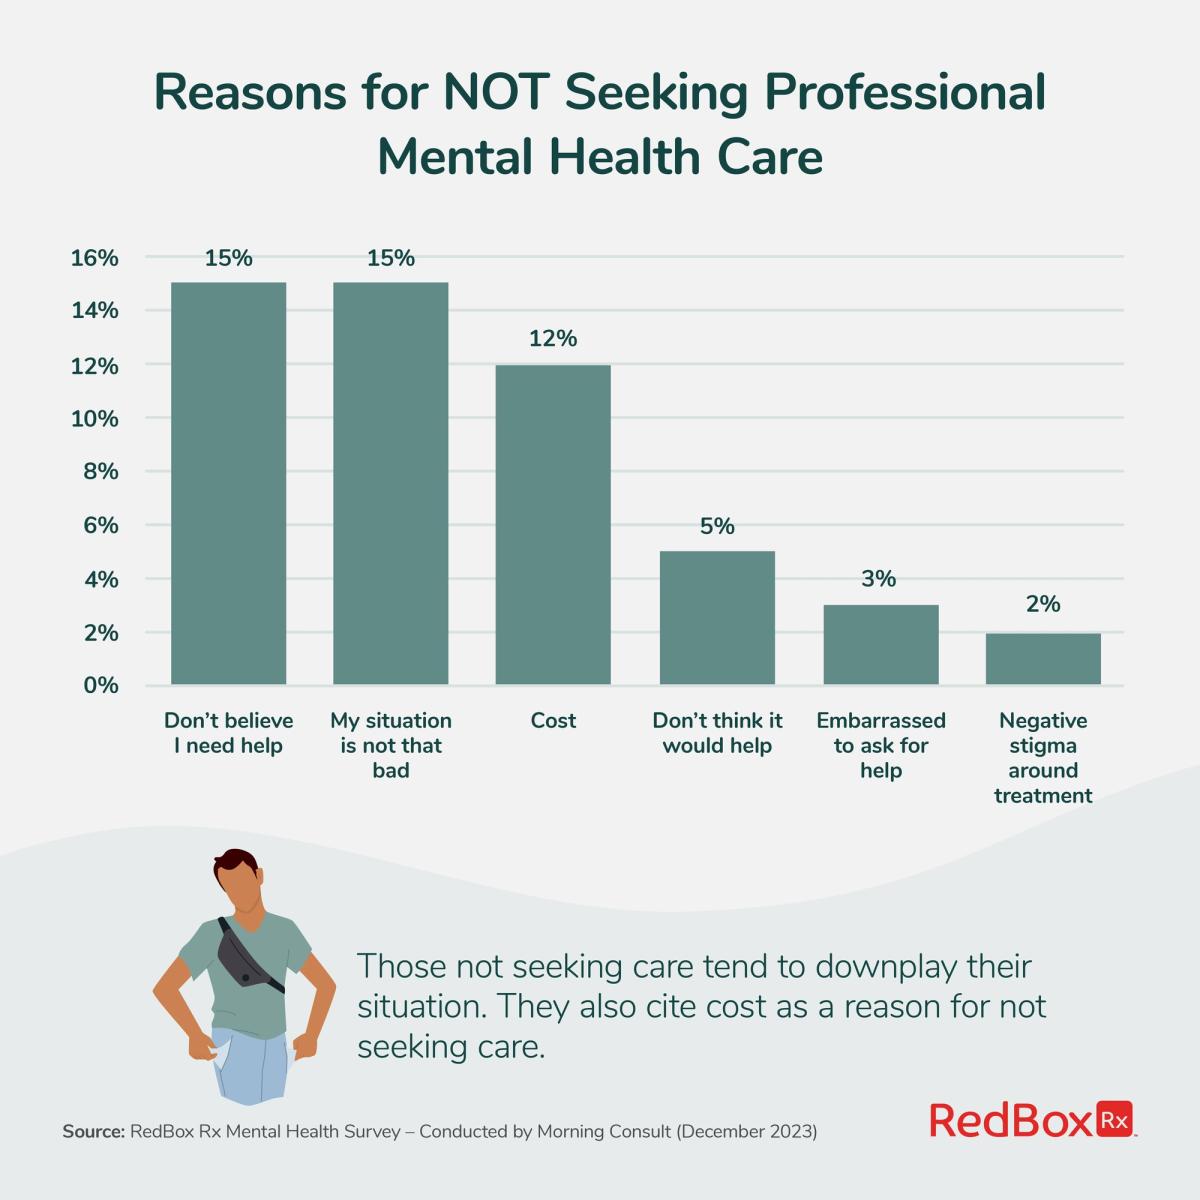 Reasons for Not Seeking Professional Mental Health Care